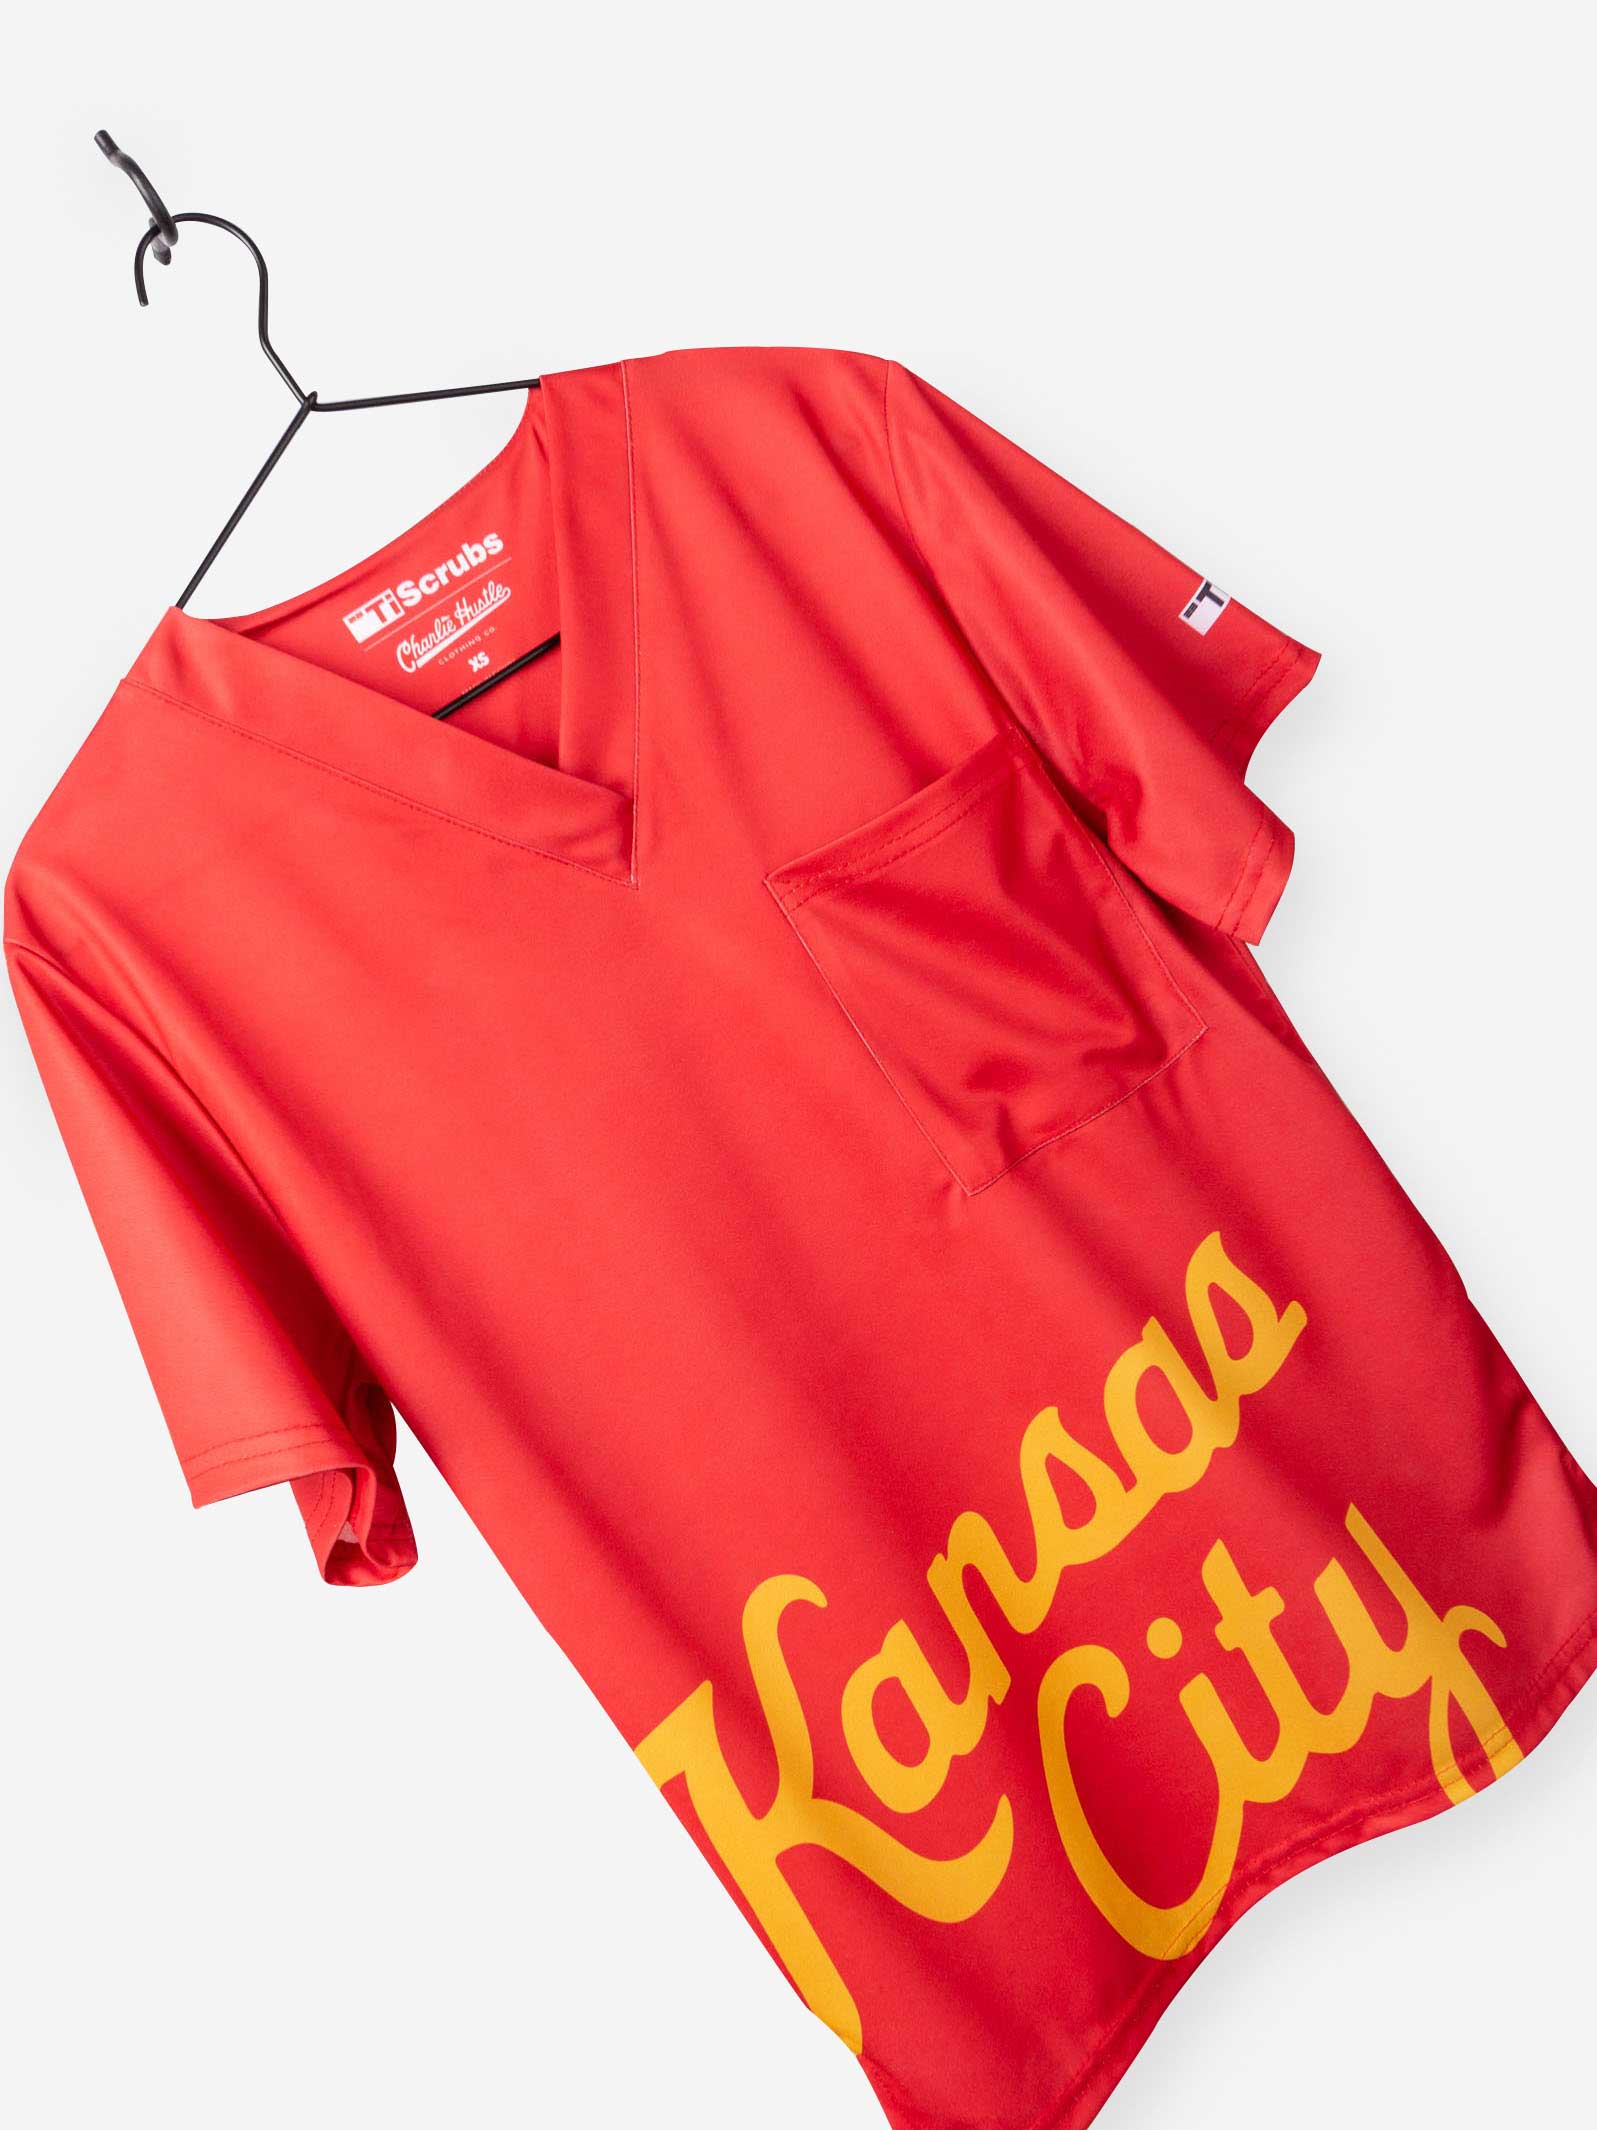 Men&#39;s Charlie Hustle Print Scrub Top with Kansas City Script in Red and Gold with Vneck